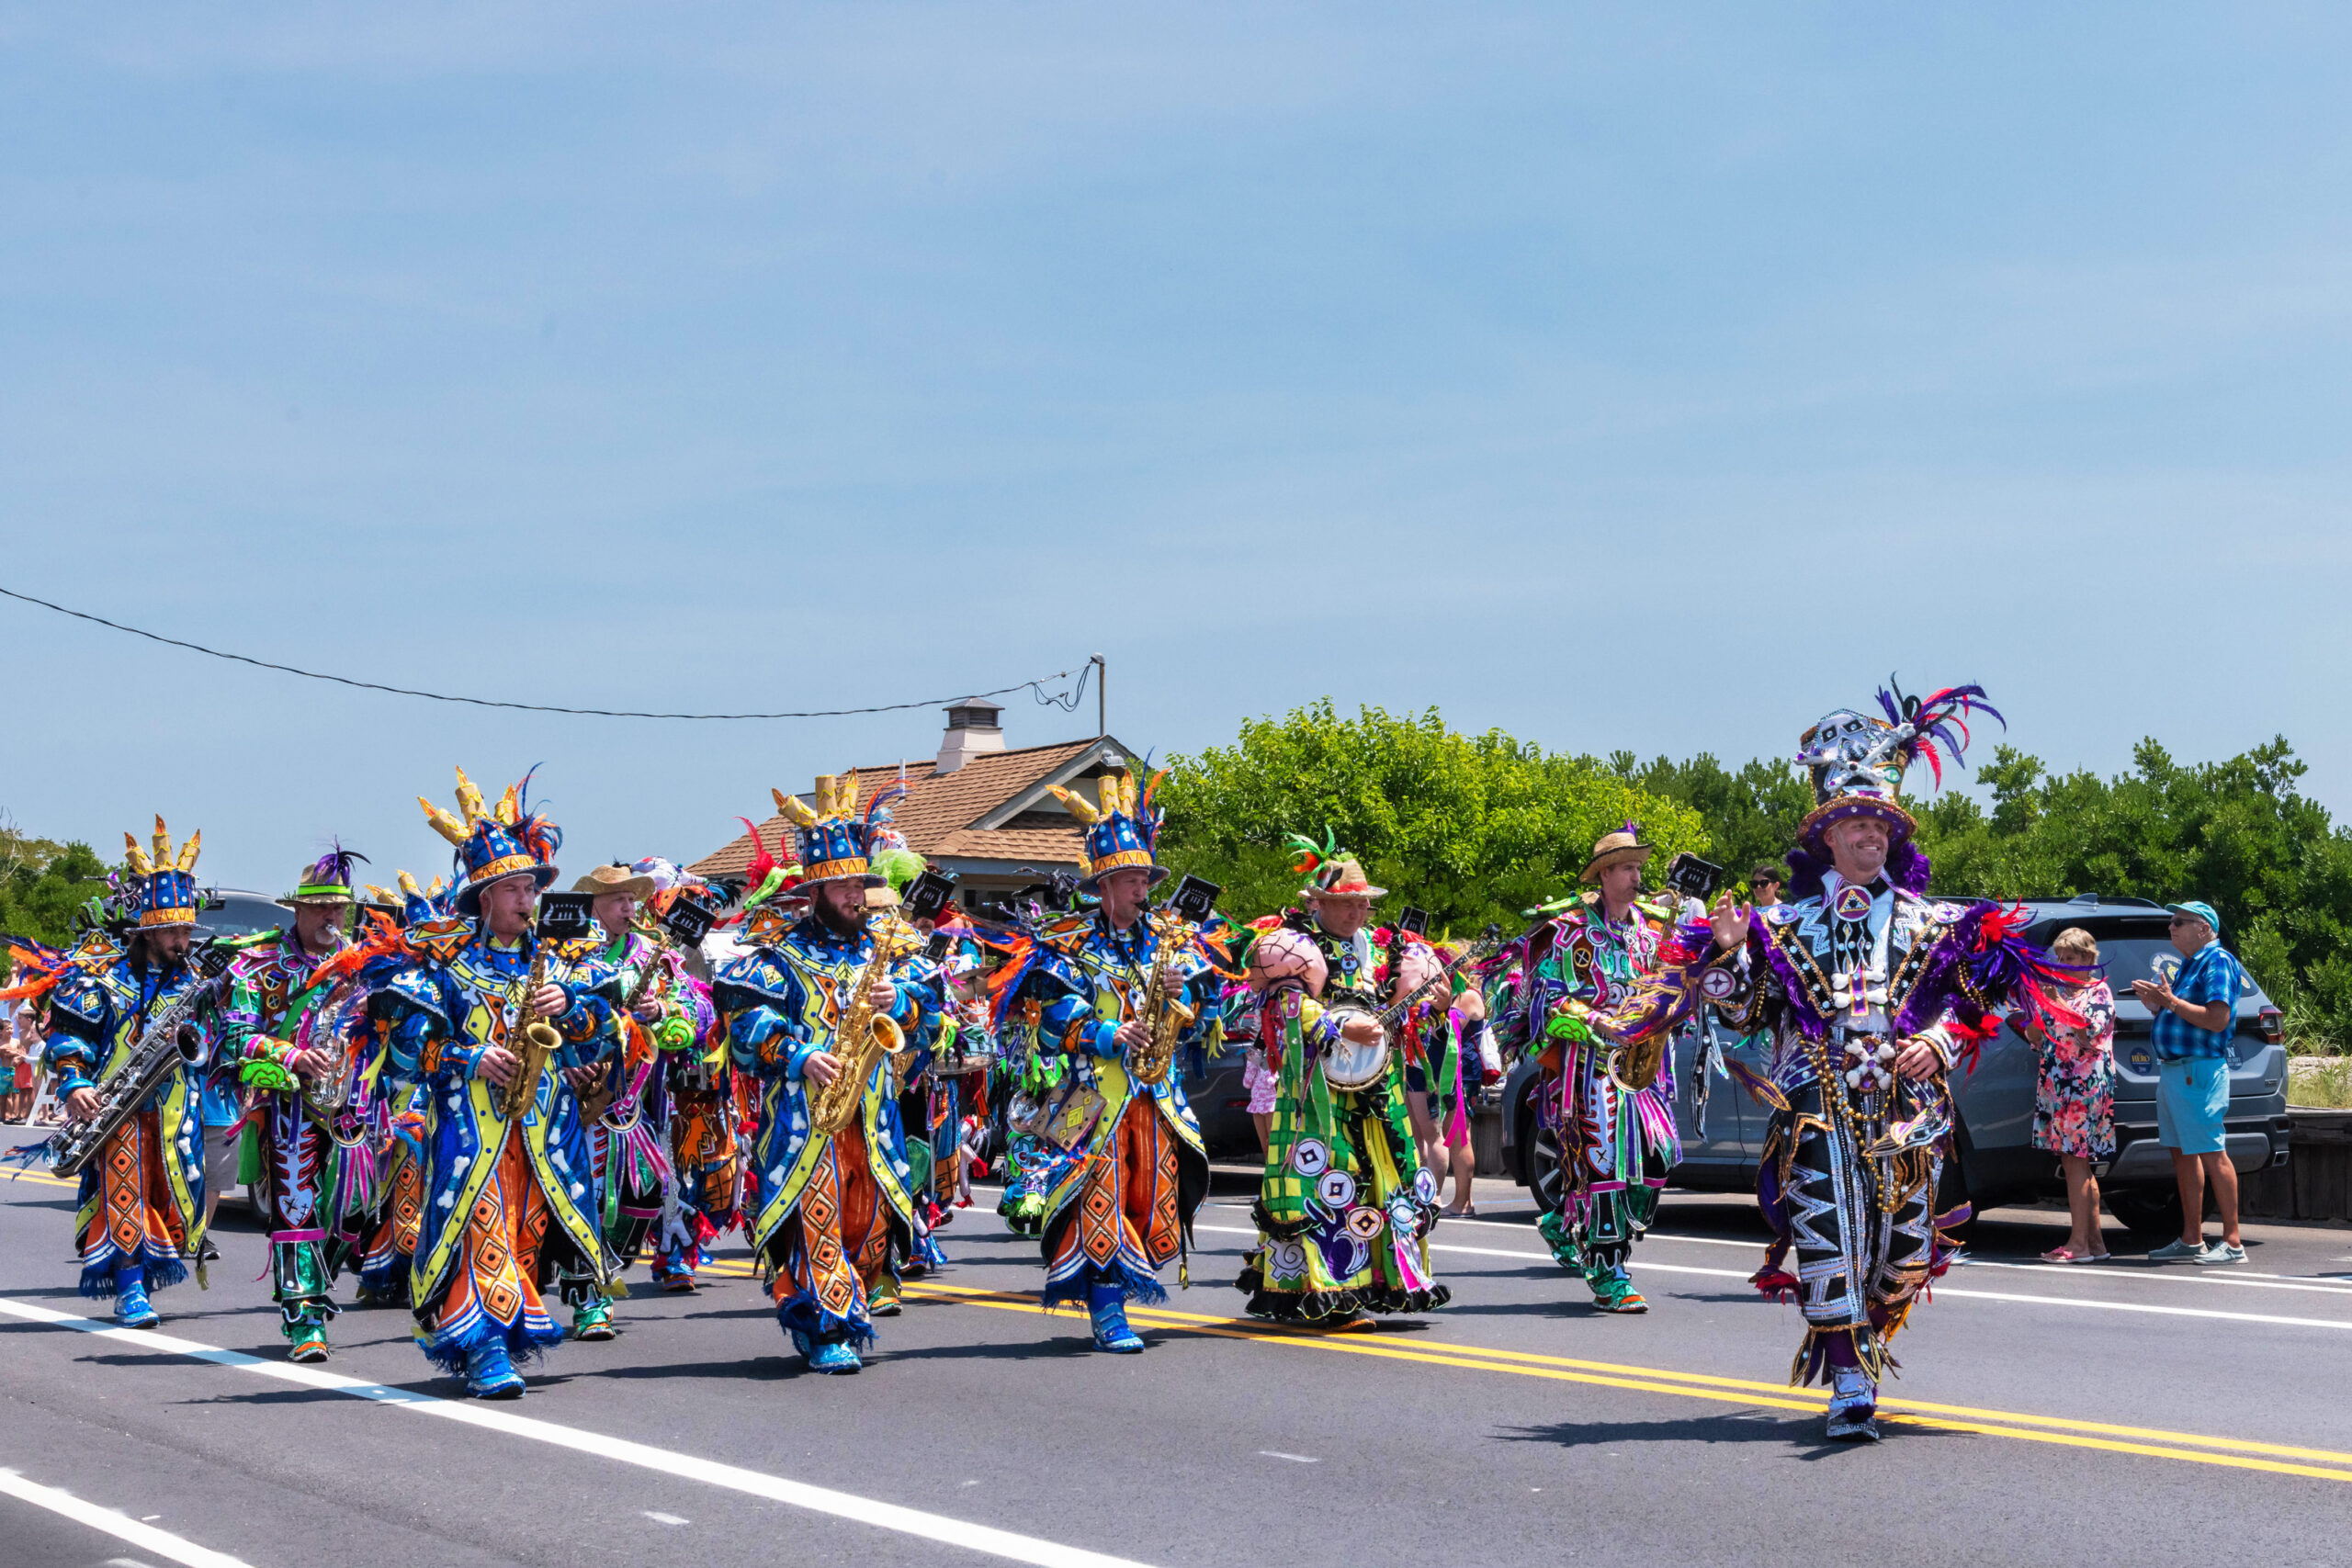 A group of mummers playing instruments in the Cape May 4th of July parade on a sunny day.